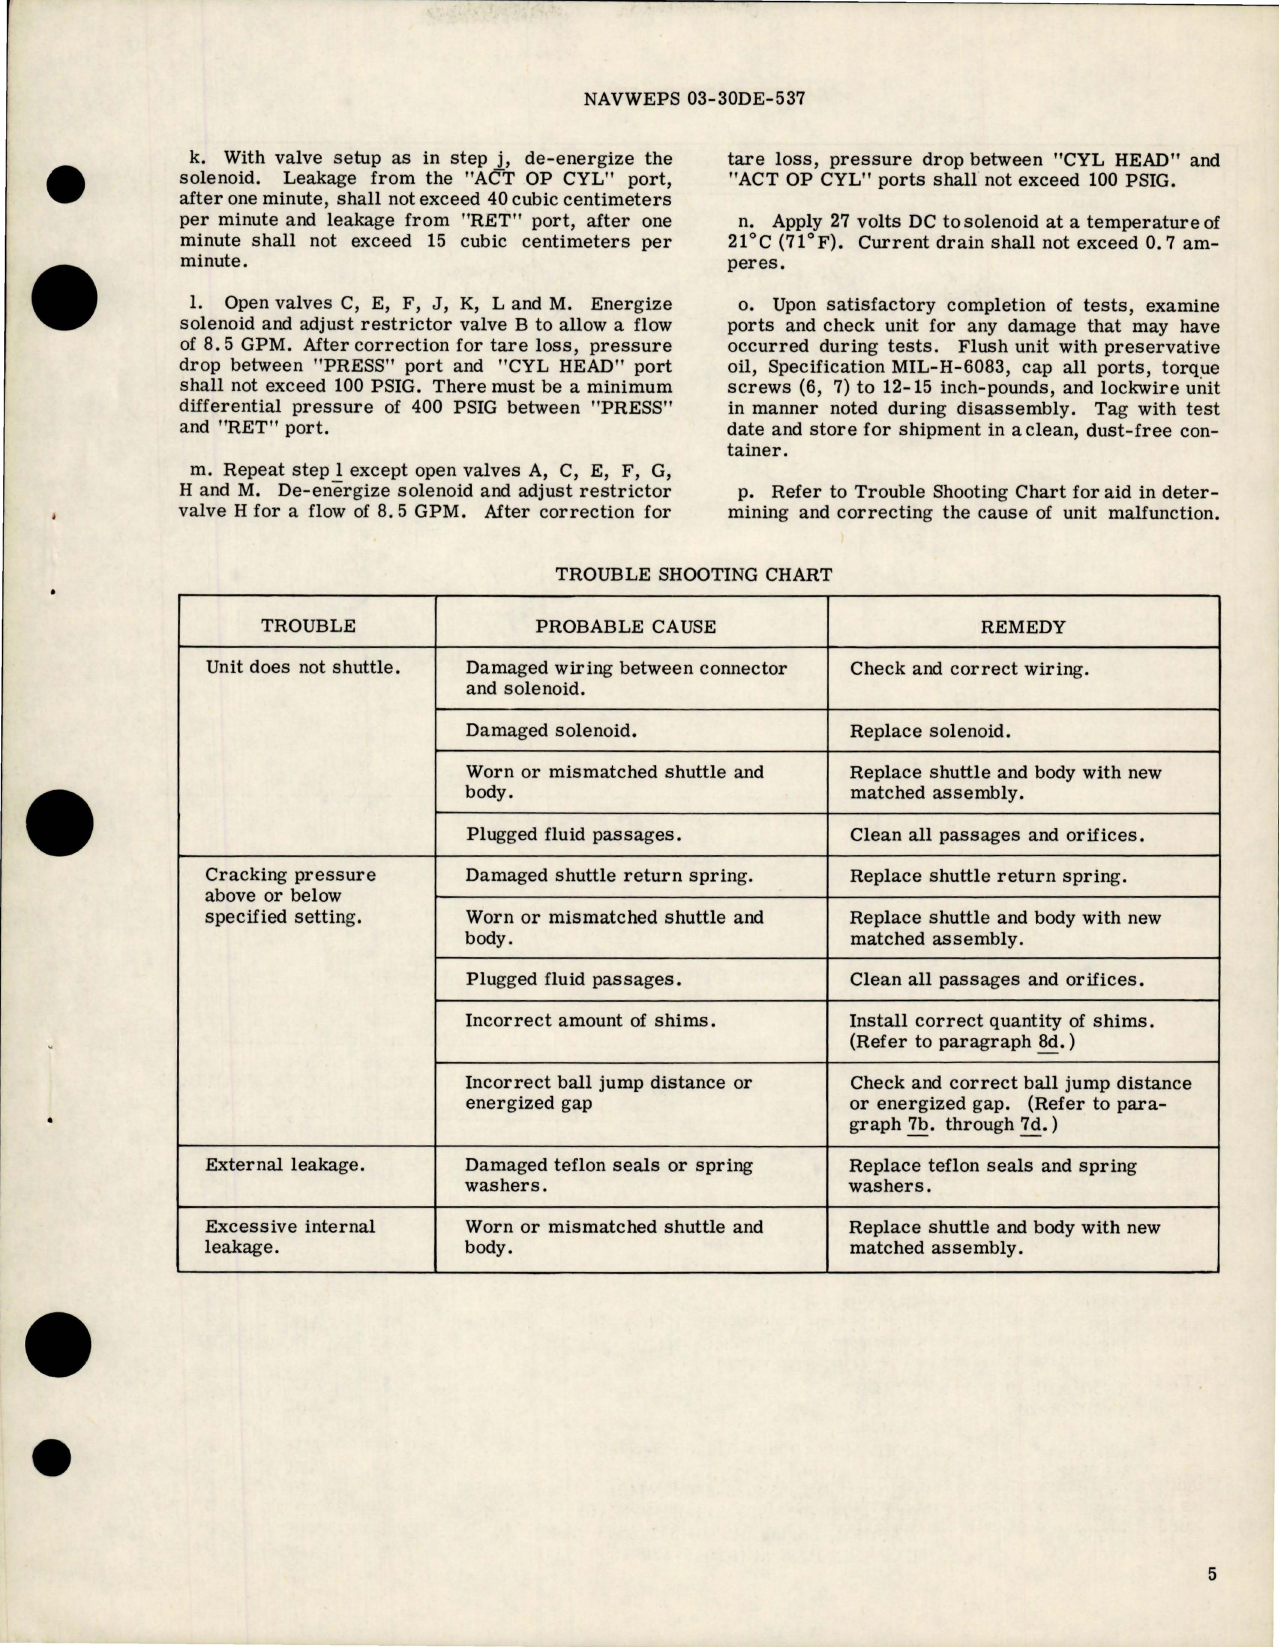 Sample page 5 from AirCorps Library document: Overhaul Instructions with Parts Breakdown for Actuator Override Valve - Parts 14930-1, 14930-2 and 14920-1